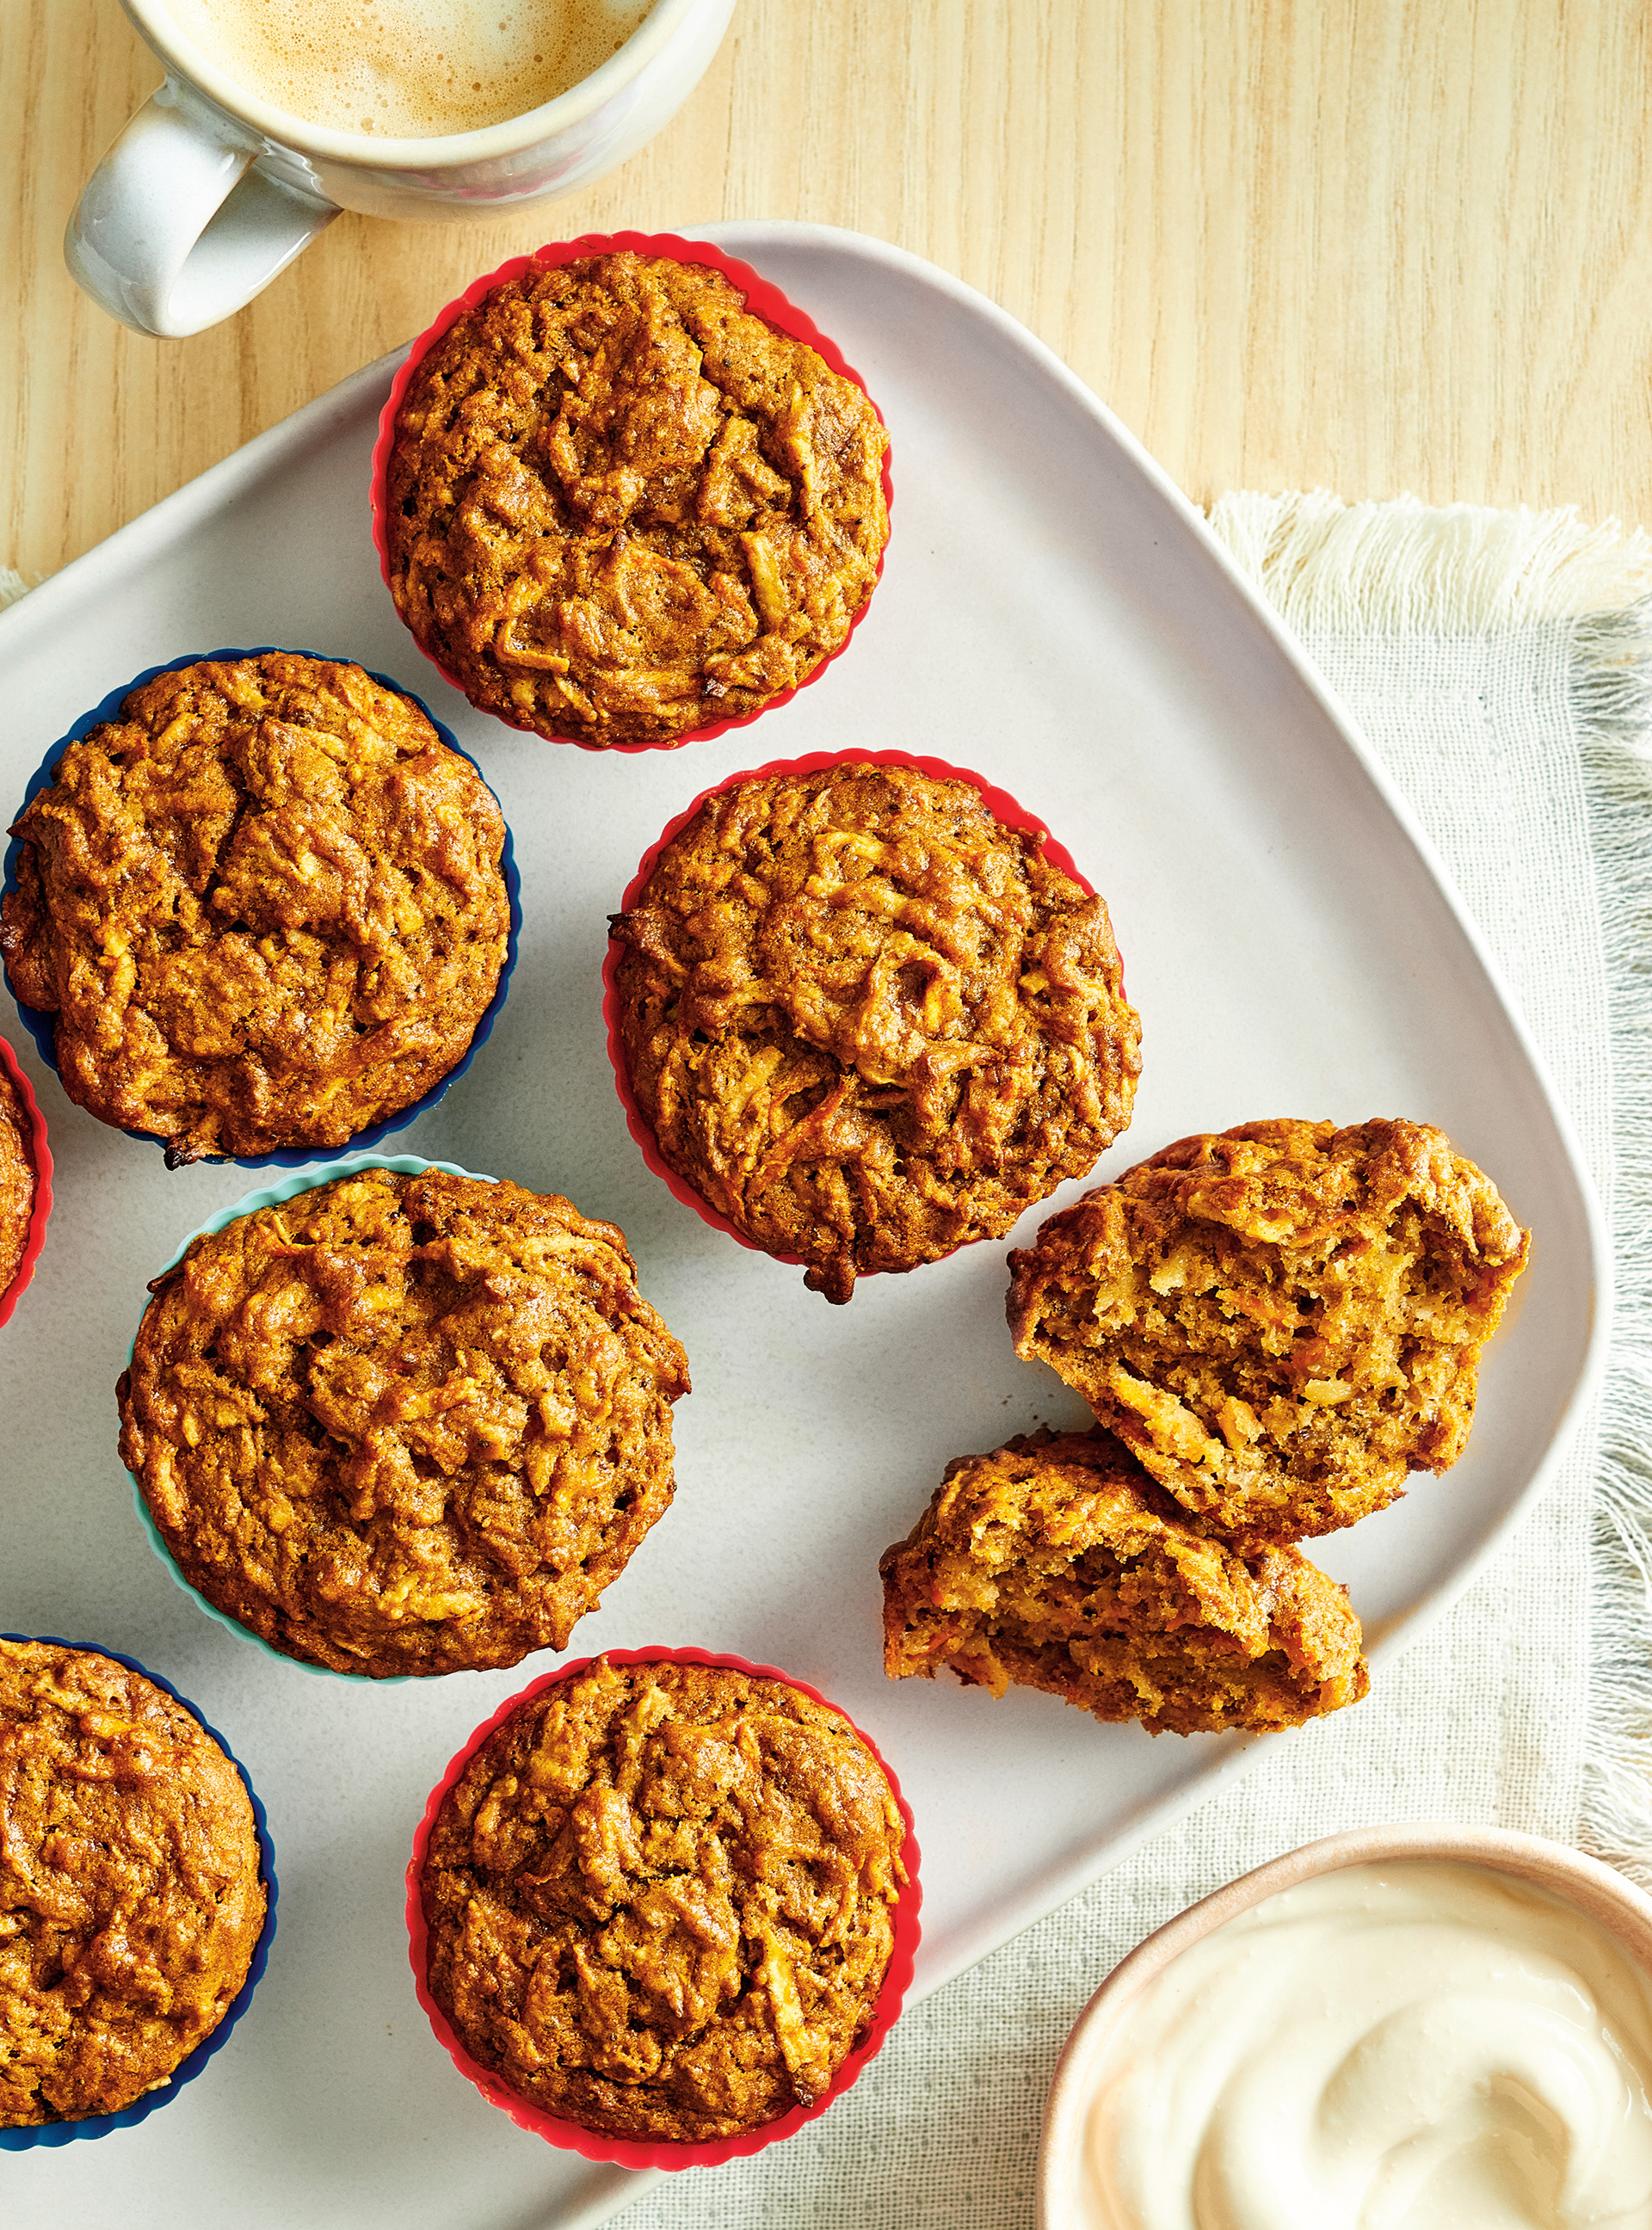 Vegan Apple and Carrot Muffins